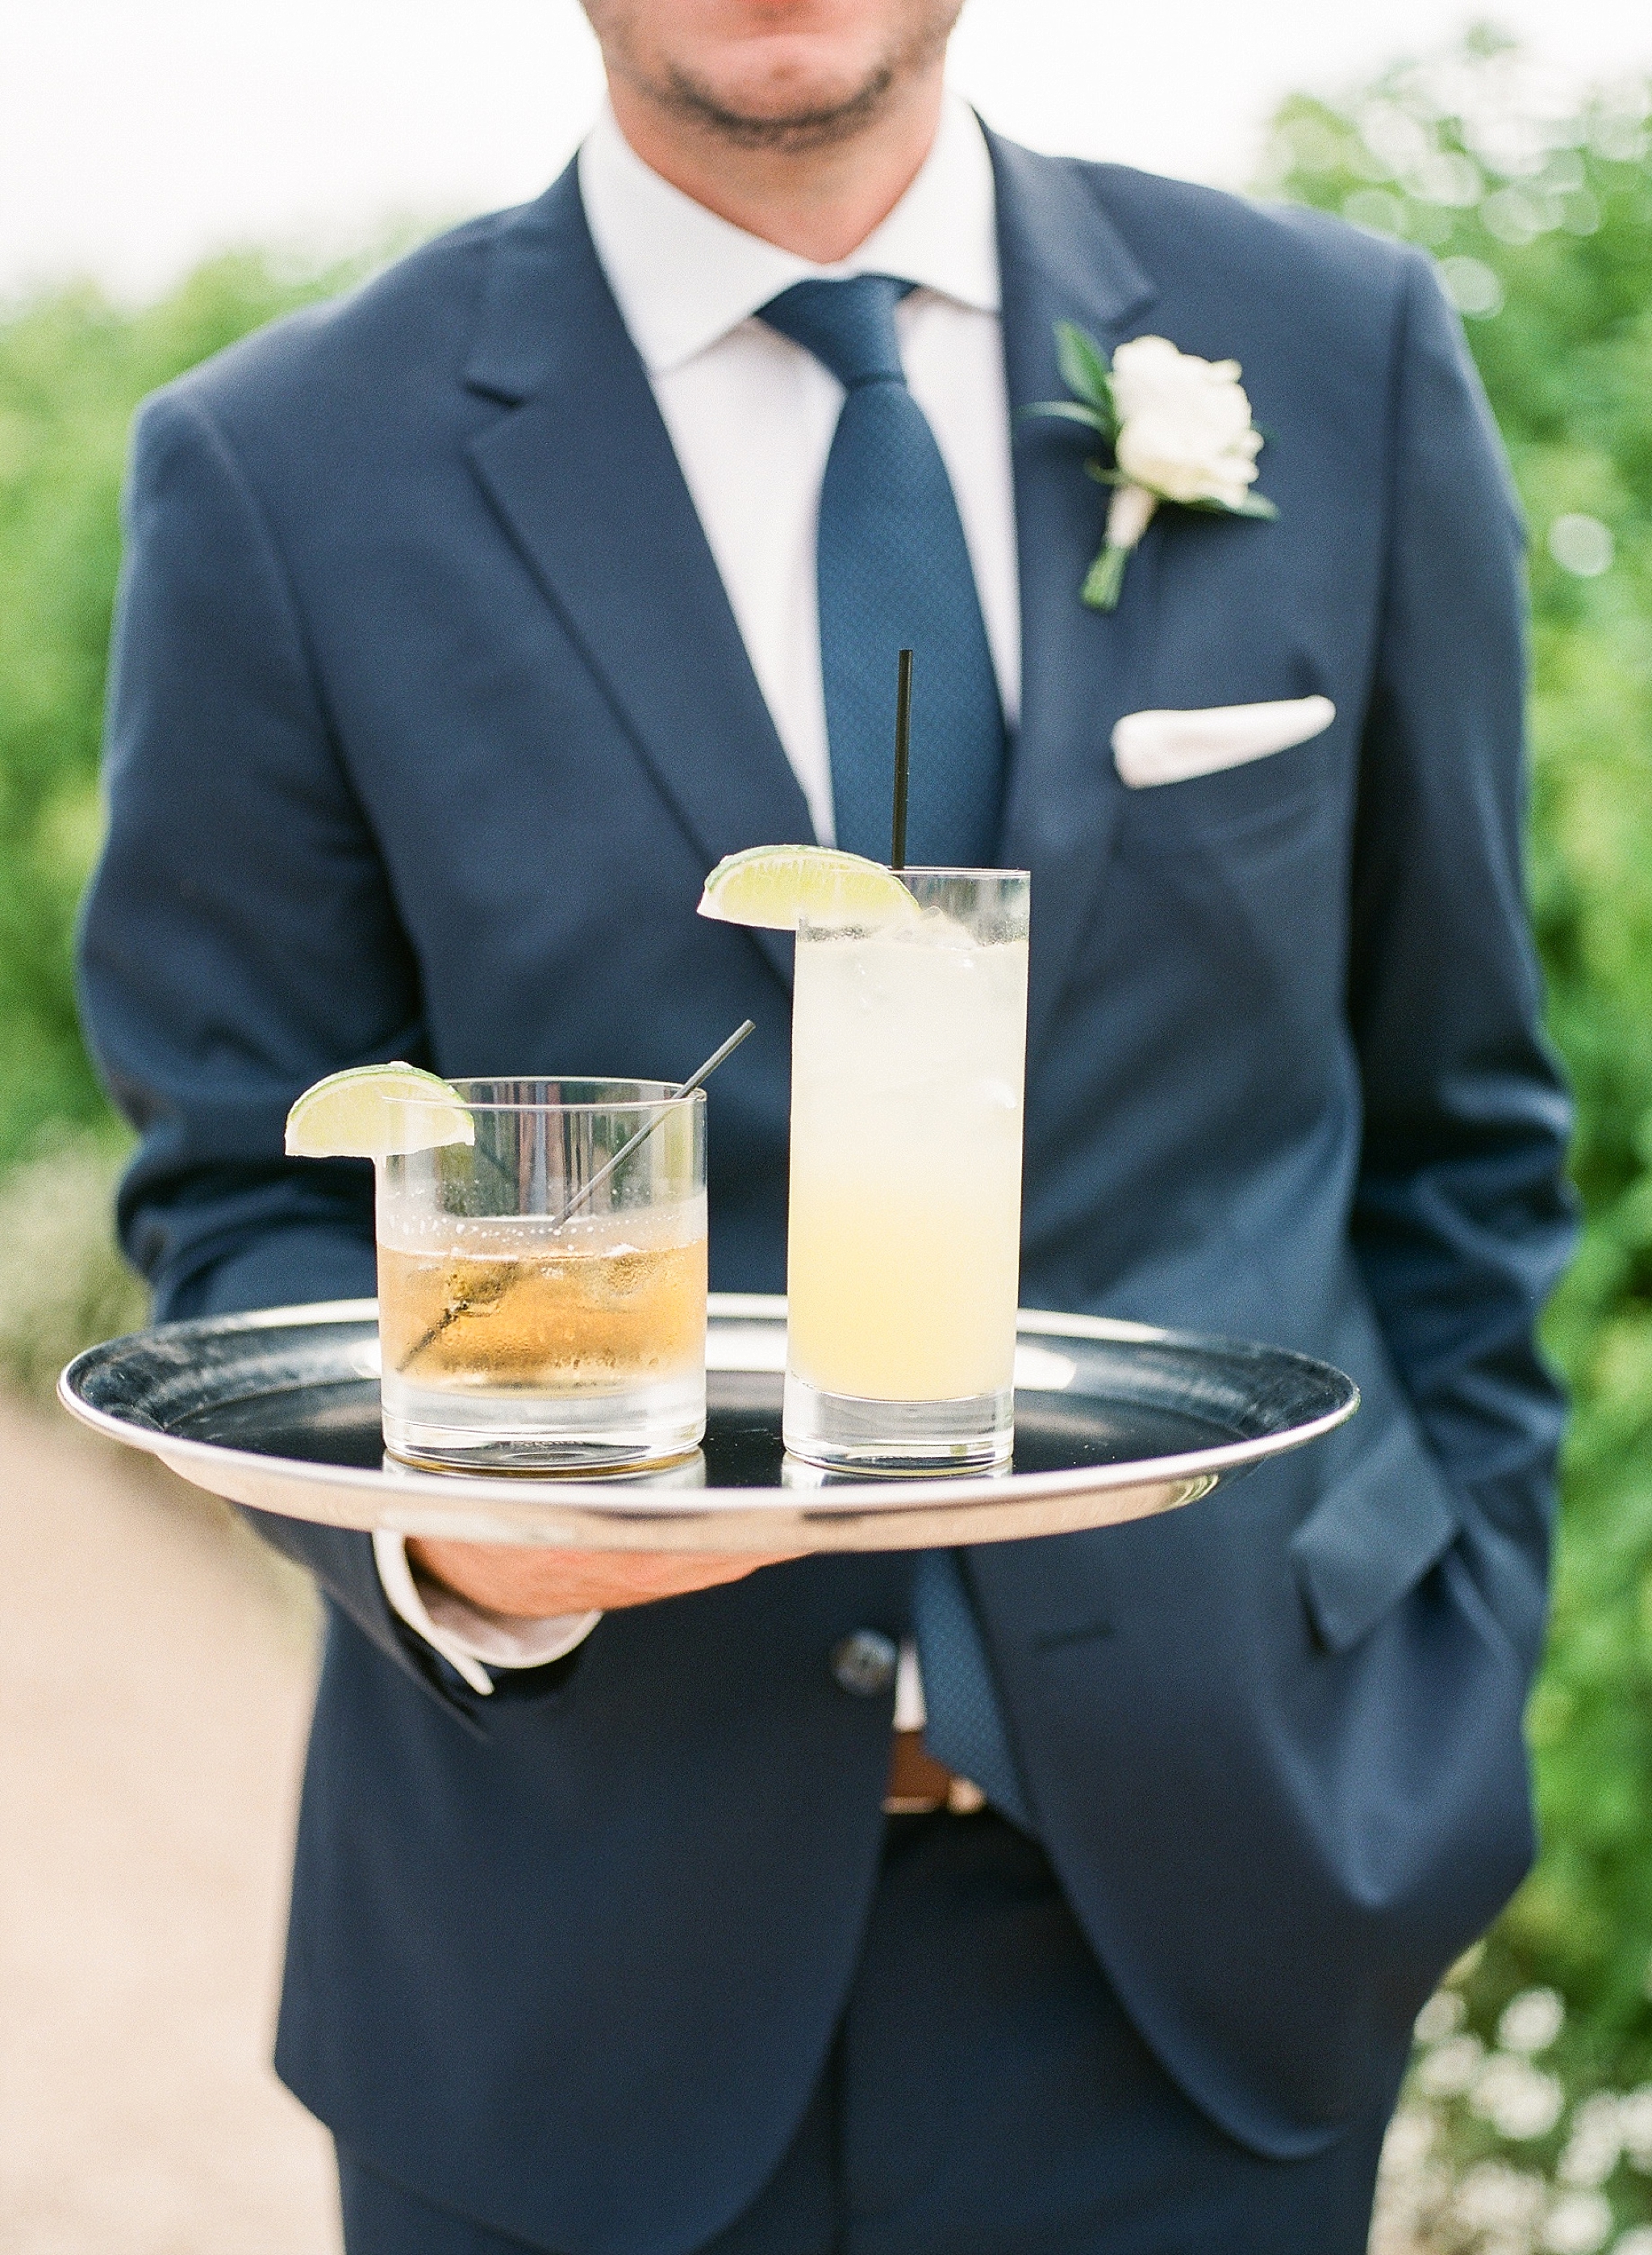 Tips on how to keep the bride and groom cool and comfortable during a hot, summer wedding day in Washington, DC!